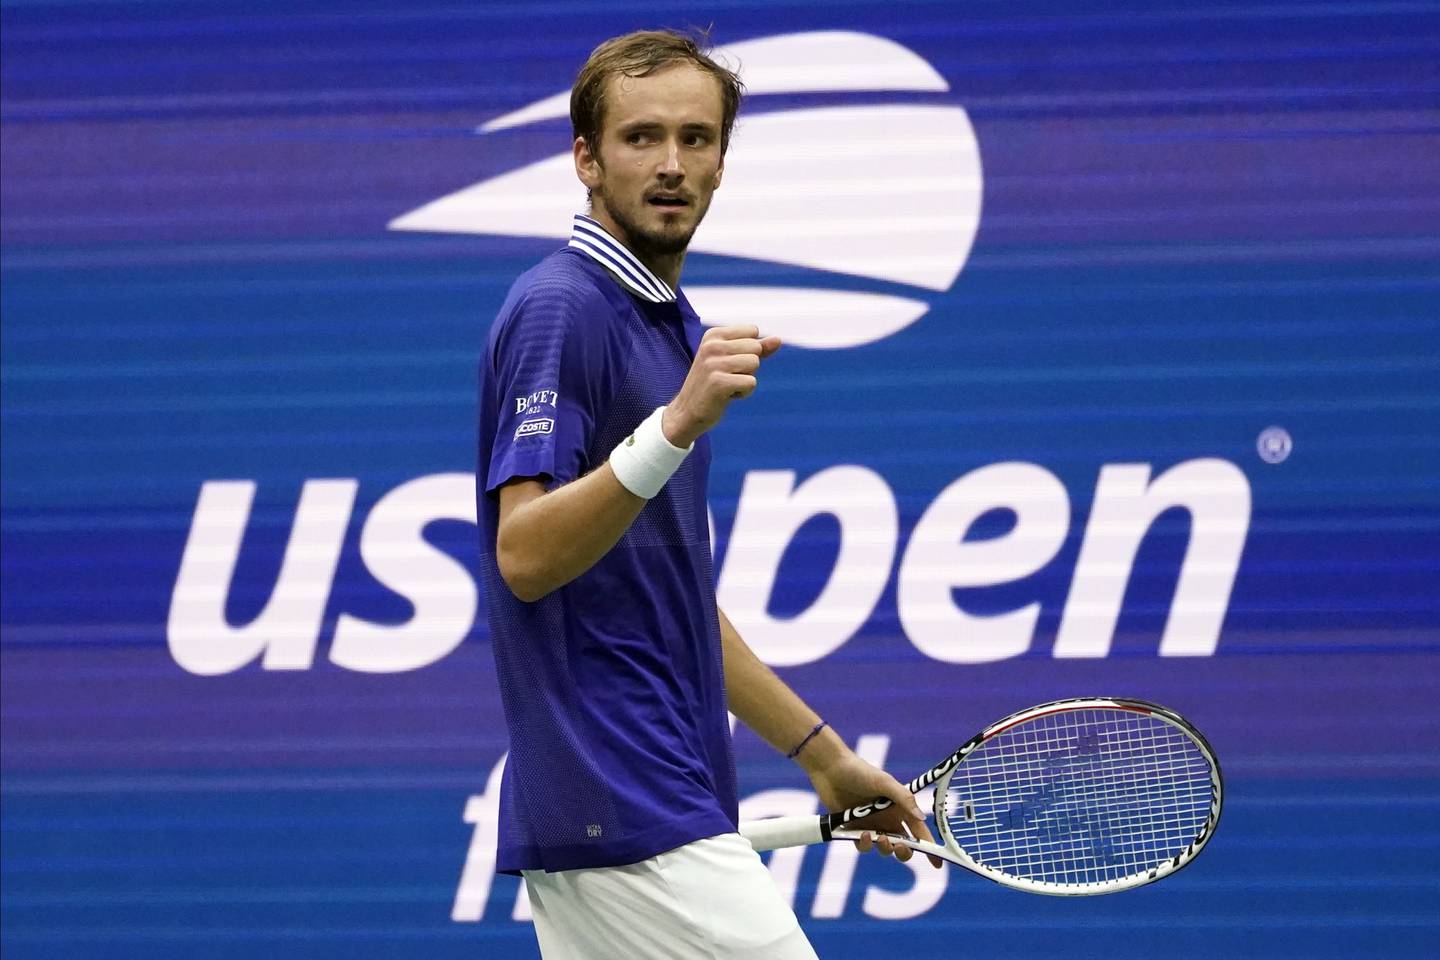 Russia's Daniil Medvedev will be allowed to defend his title at this year's US Open. AP